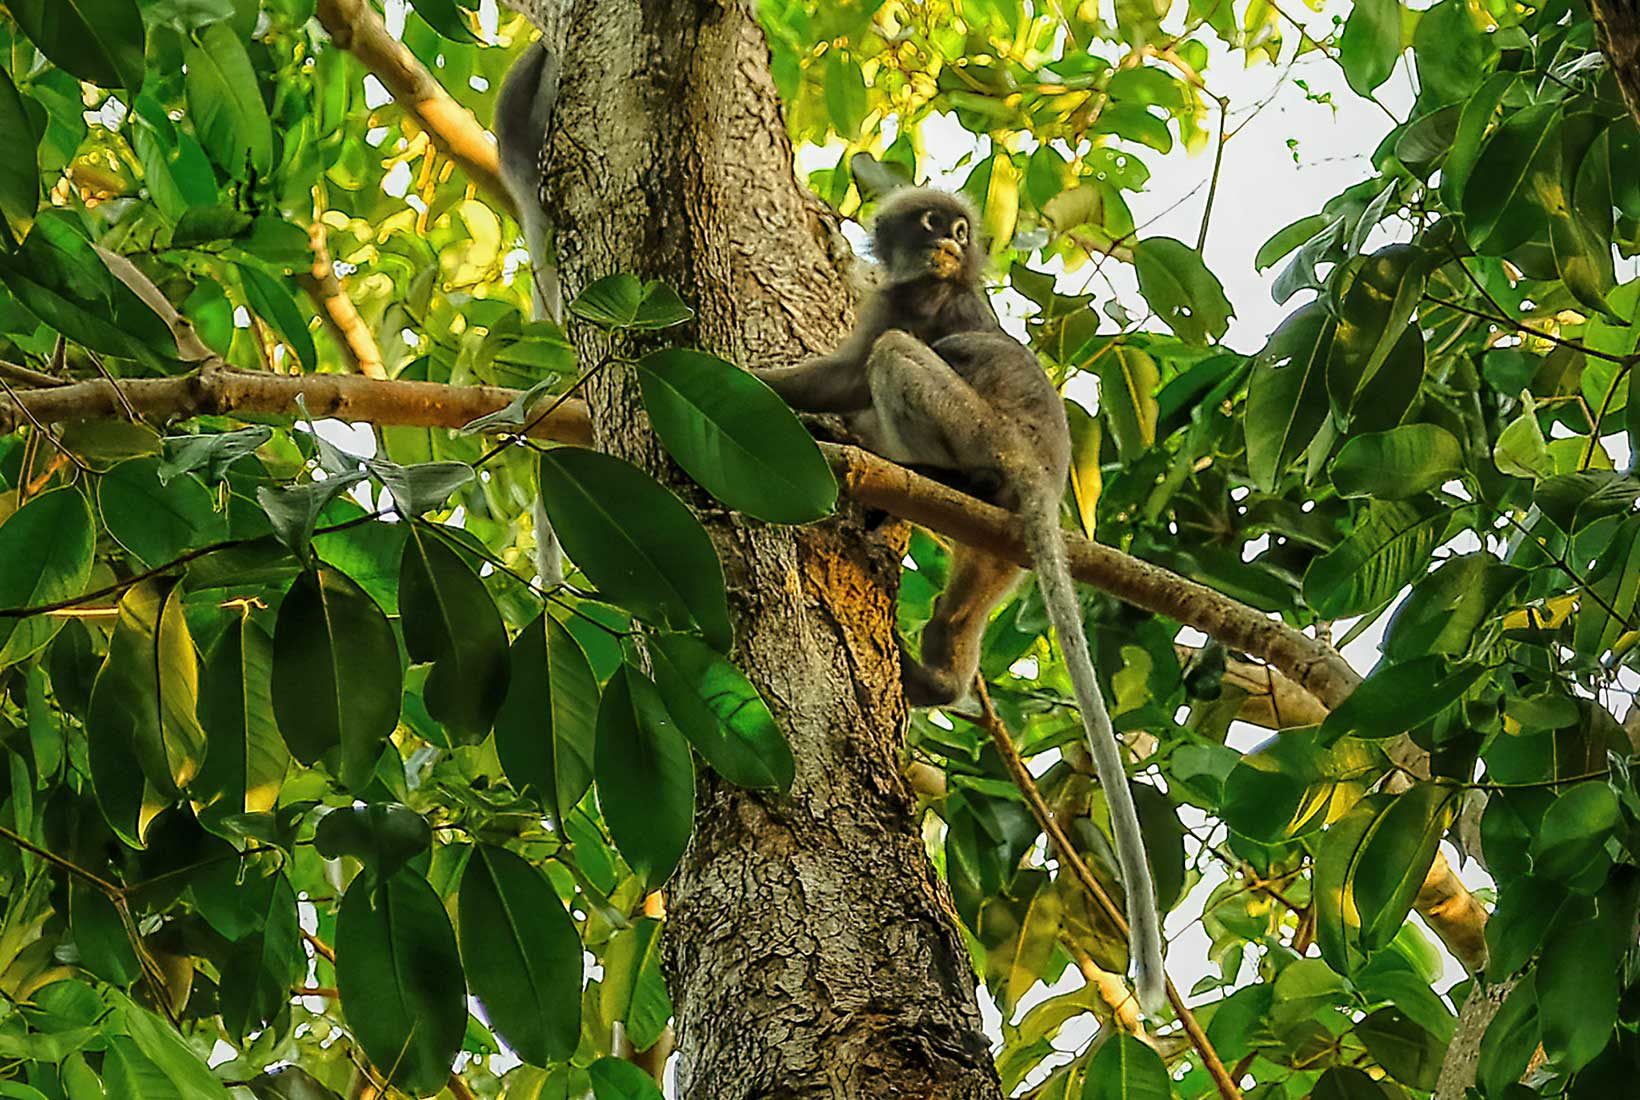 Spectacled Langurs (also known as Dusky Langurs) roam the treetops at Railay Beach